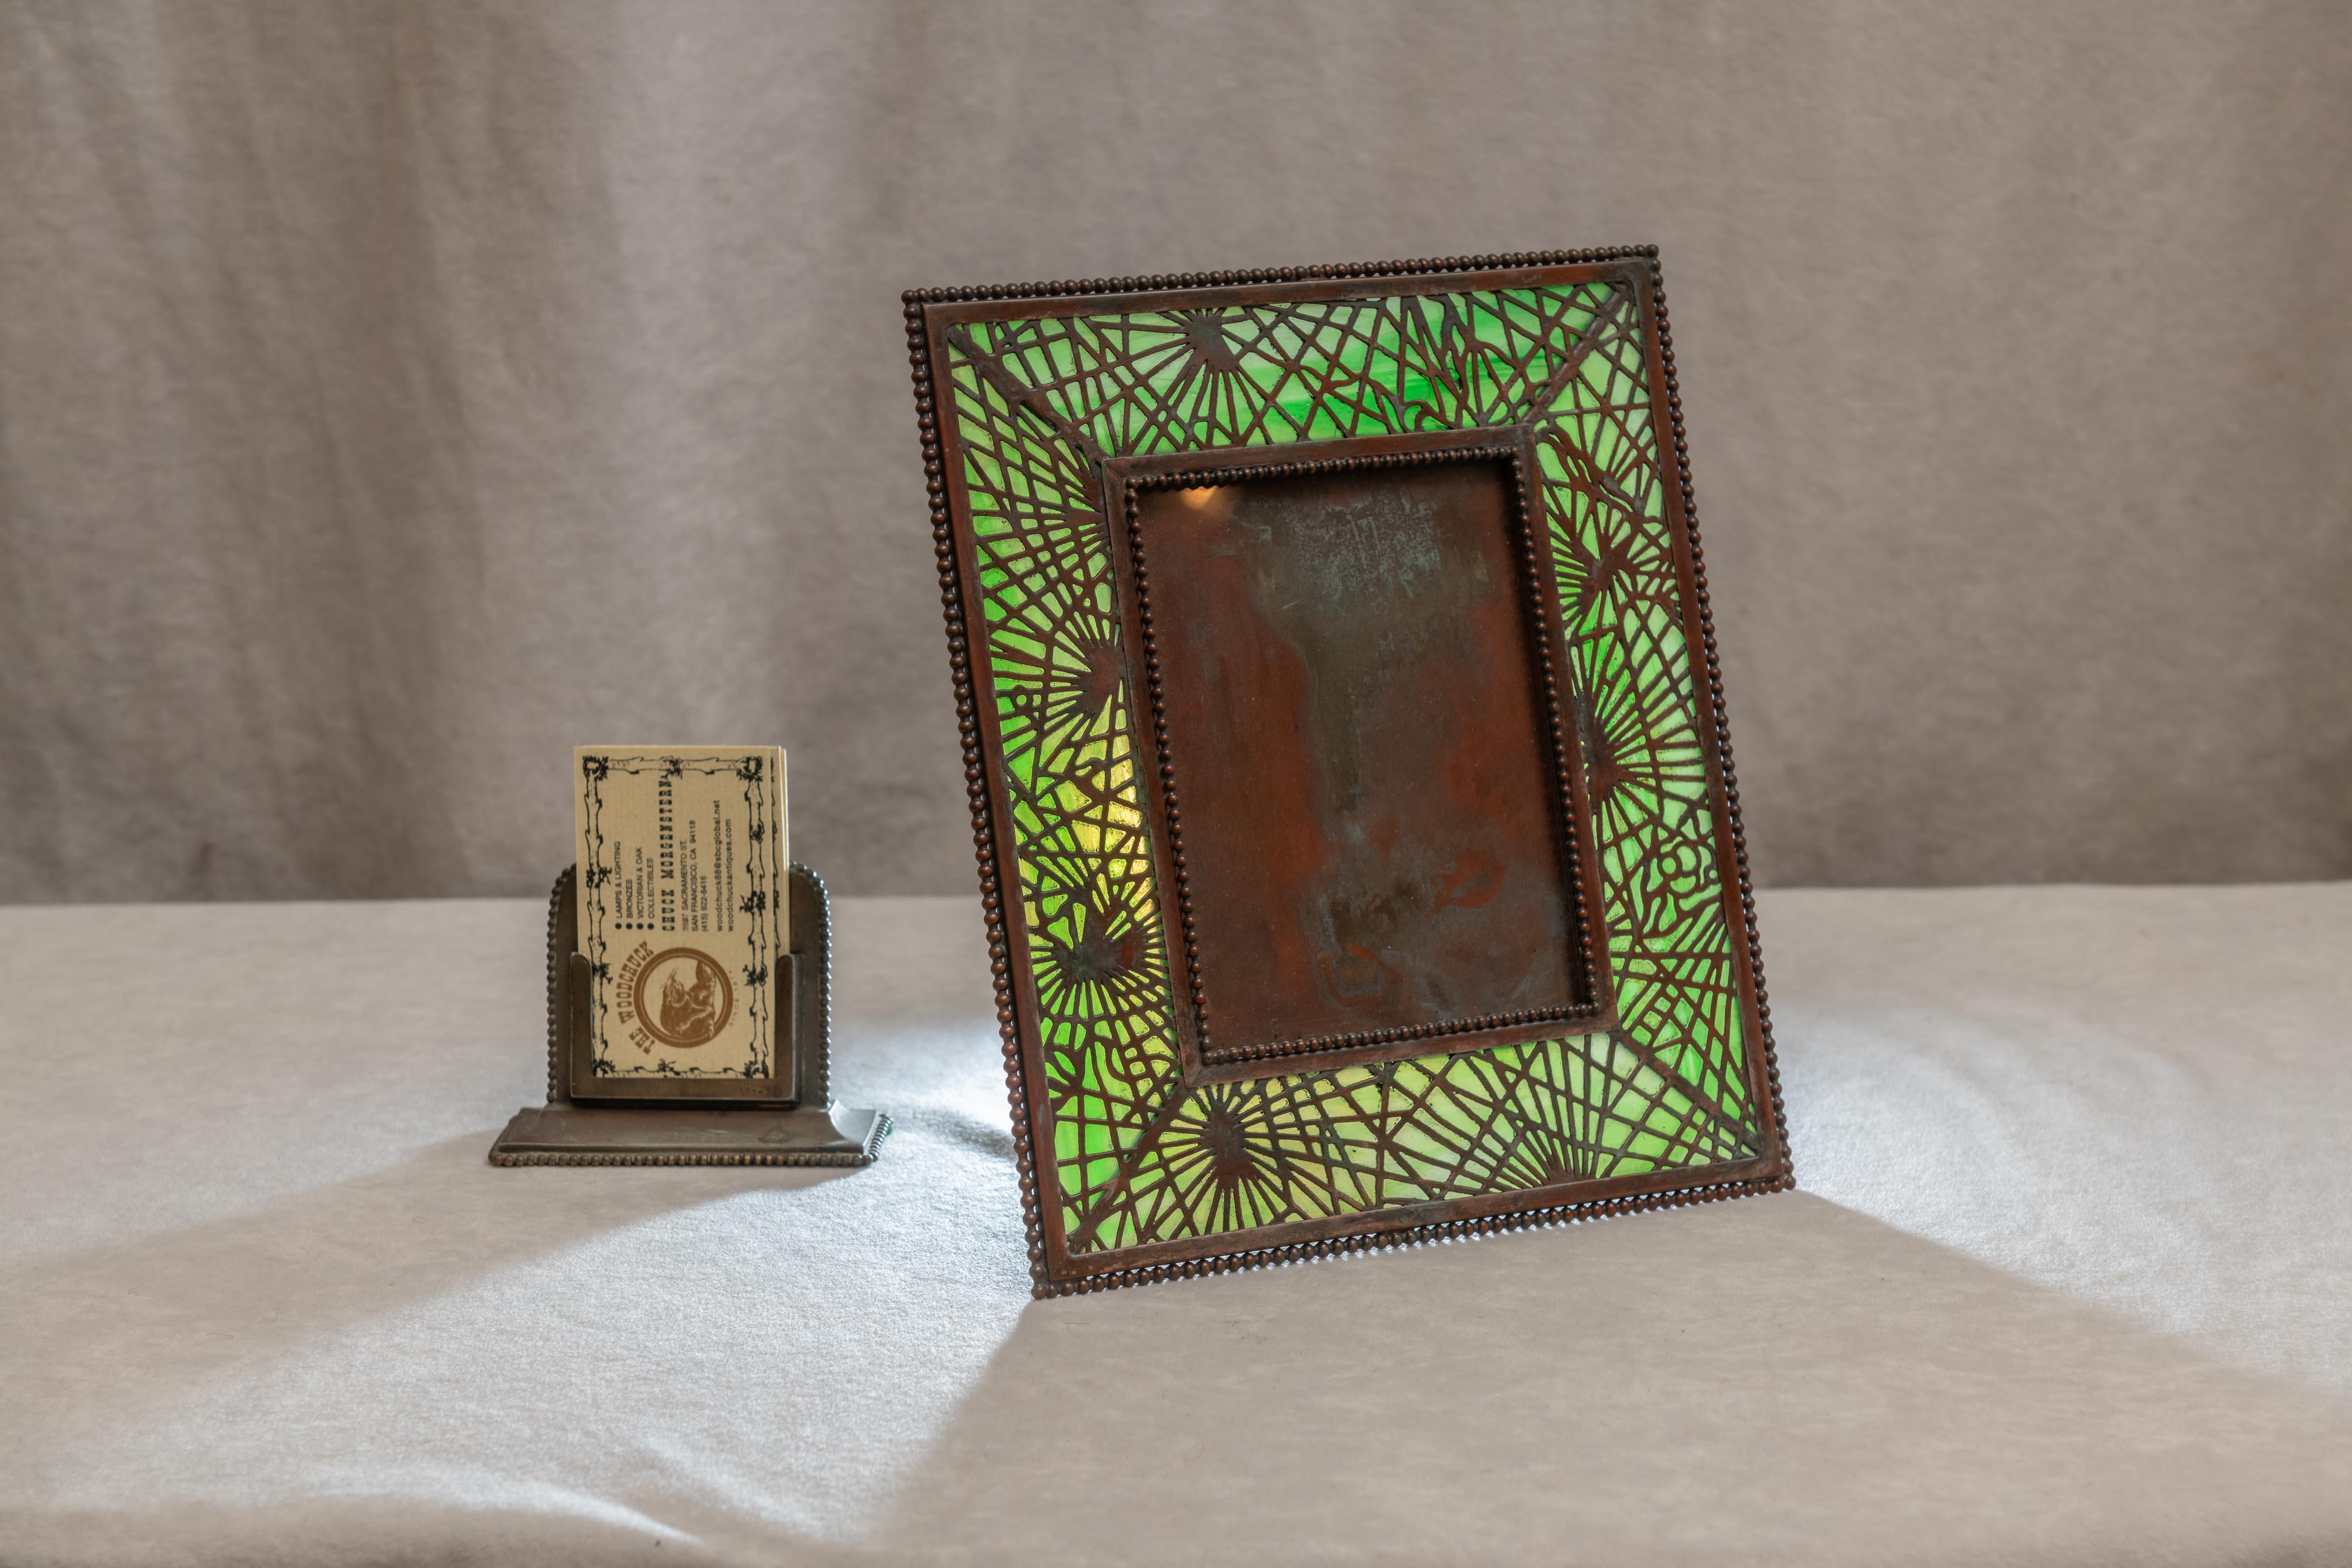 Another fine example of the workmanship of the great Tiffany Studios. This is Louis Comfort Tiffany, not to be confused with Tiffany Co., a dept. store. That was his dad. Tiffany Studios was known for his lamps and great glass. This frame has glass